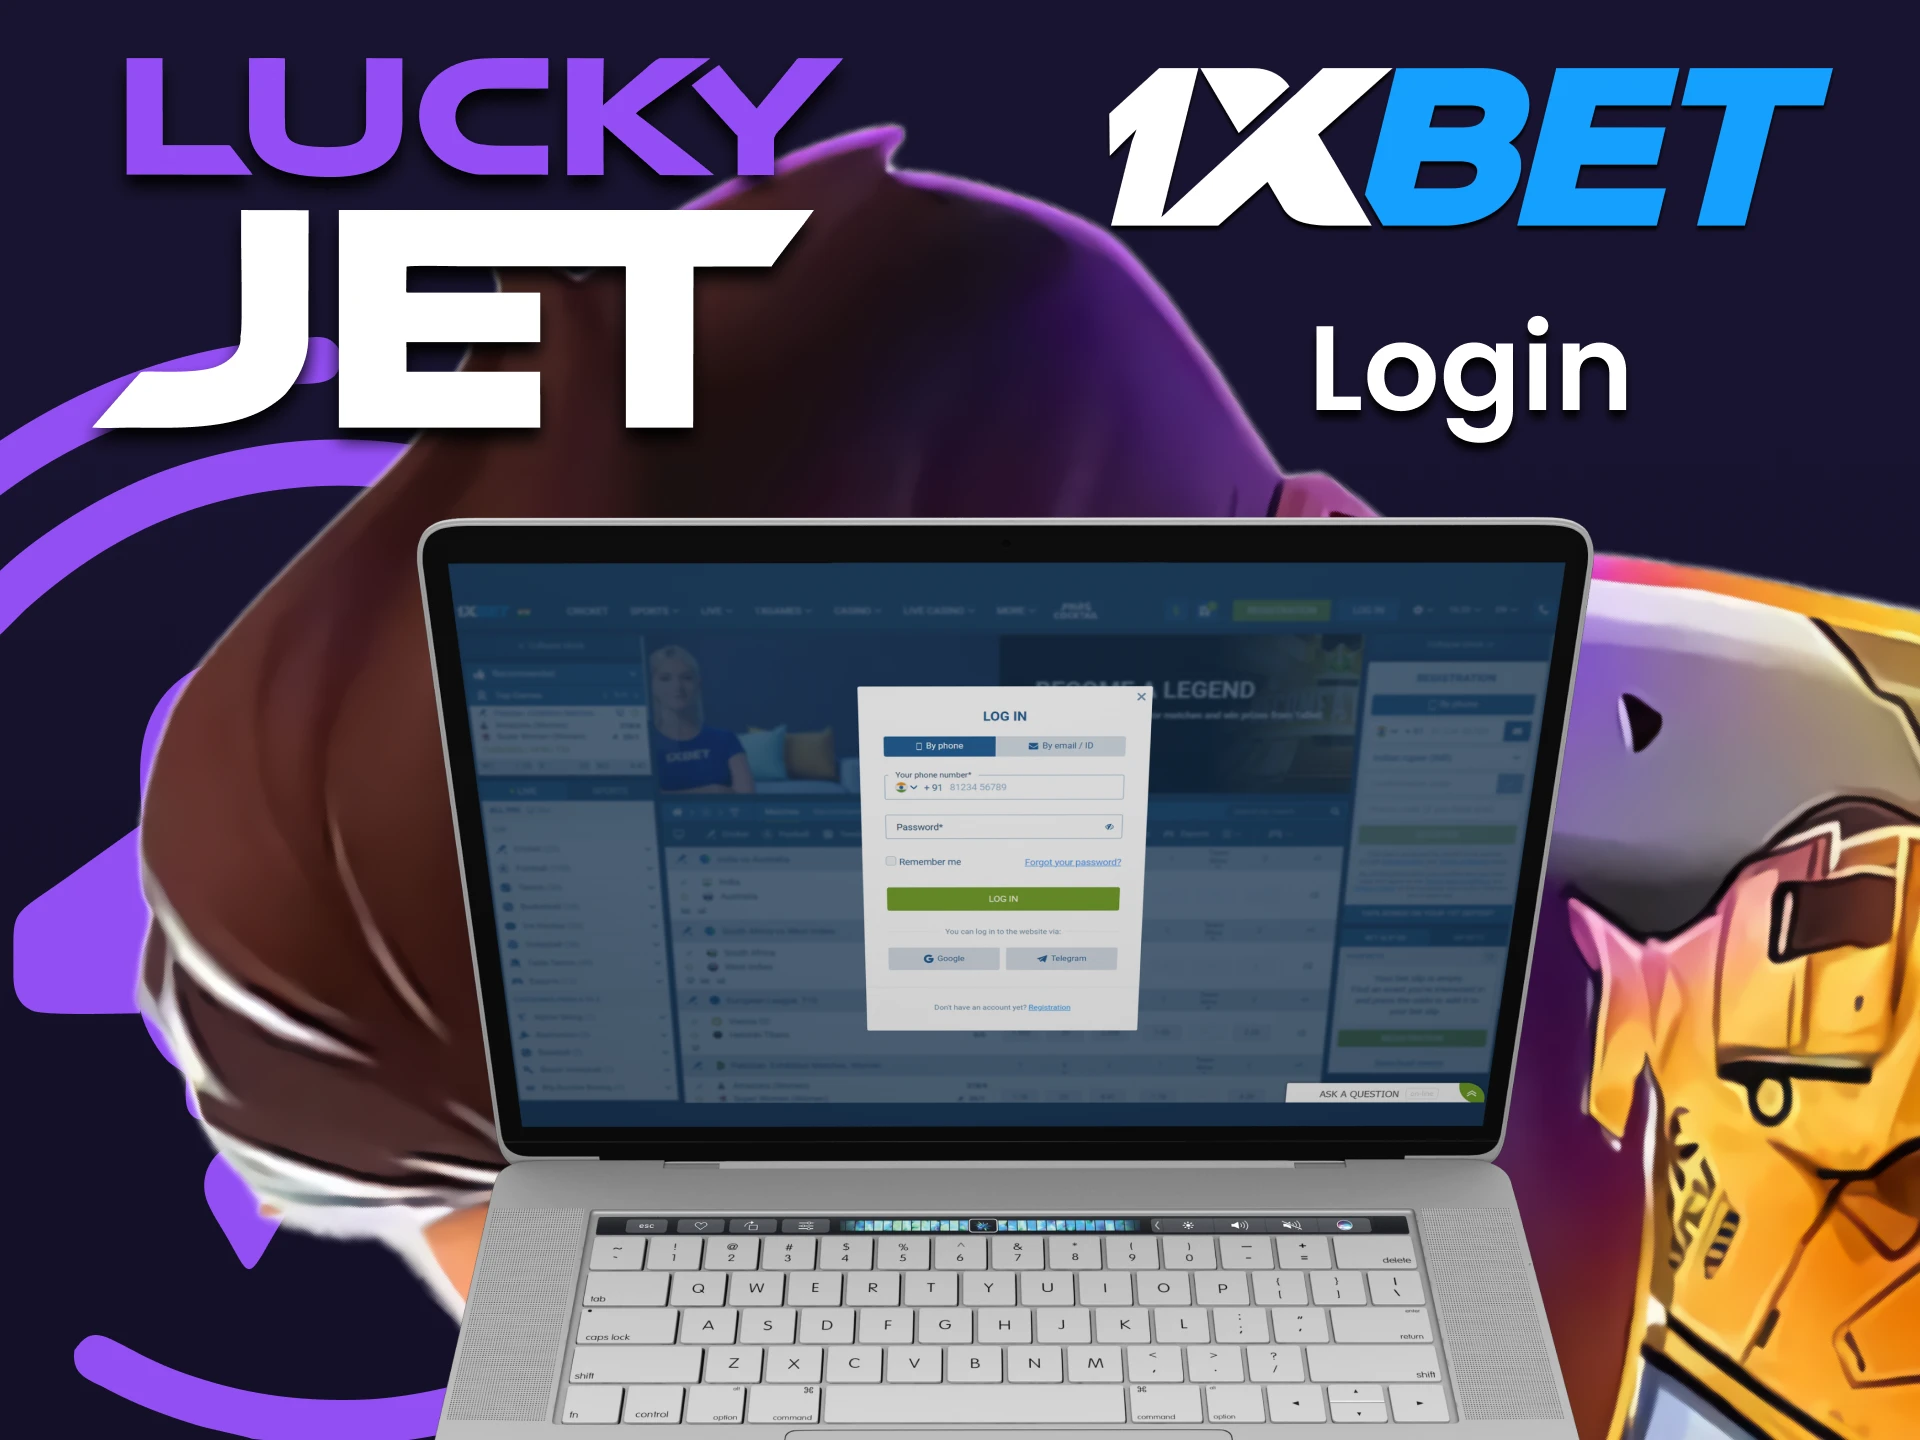 Login to your 1xbet account to start playing Lucky Jet.